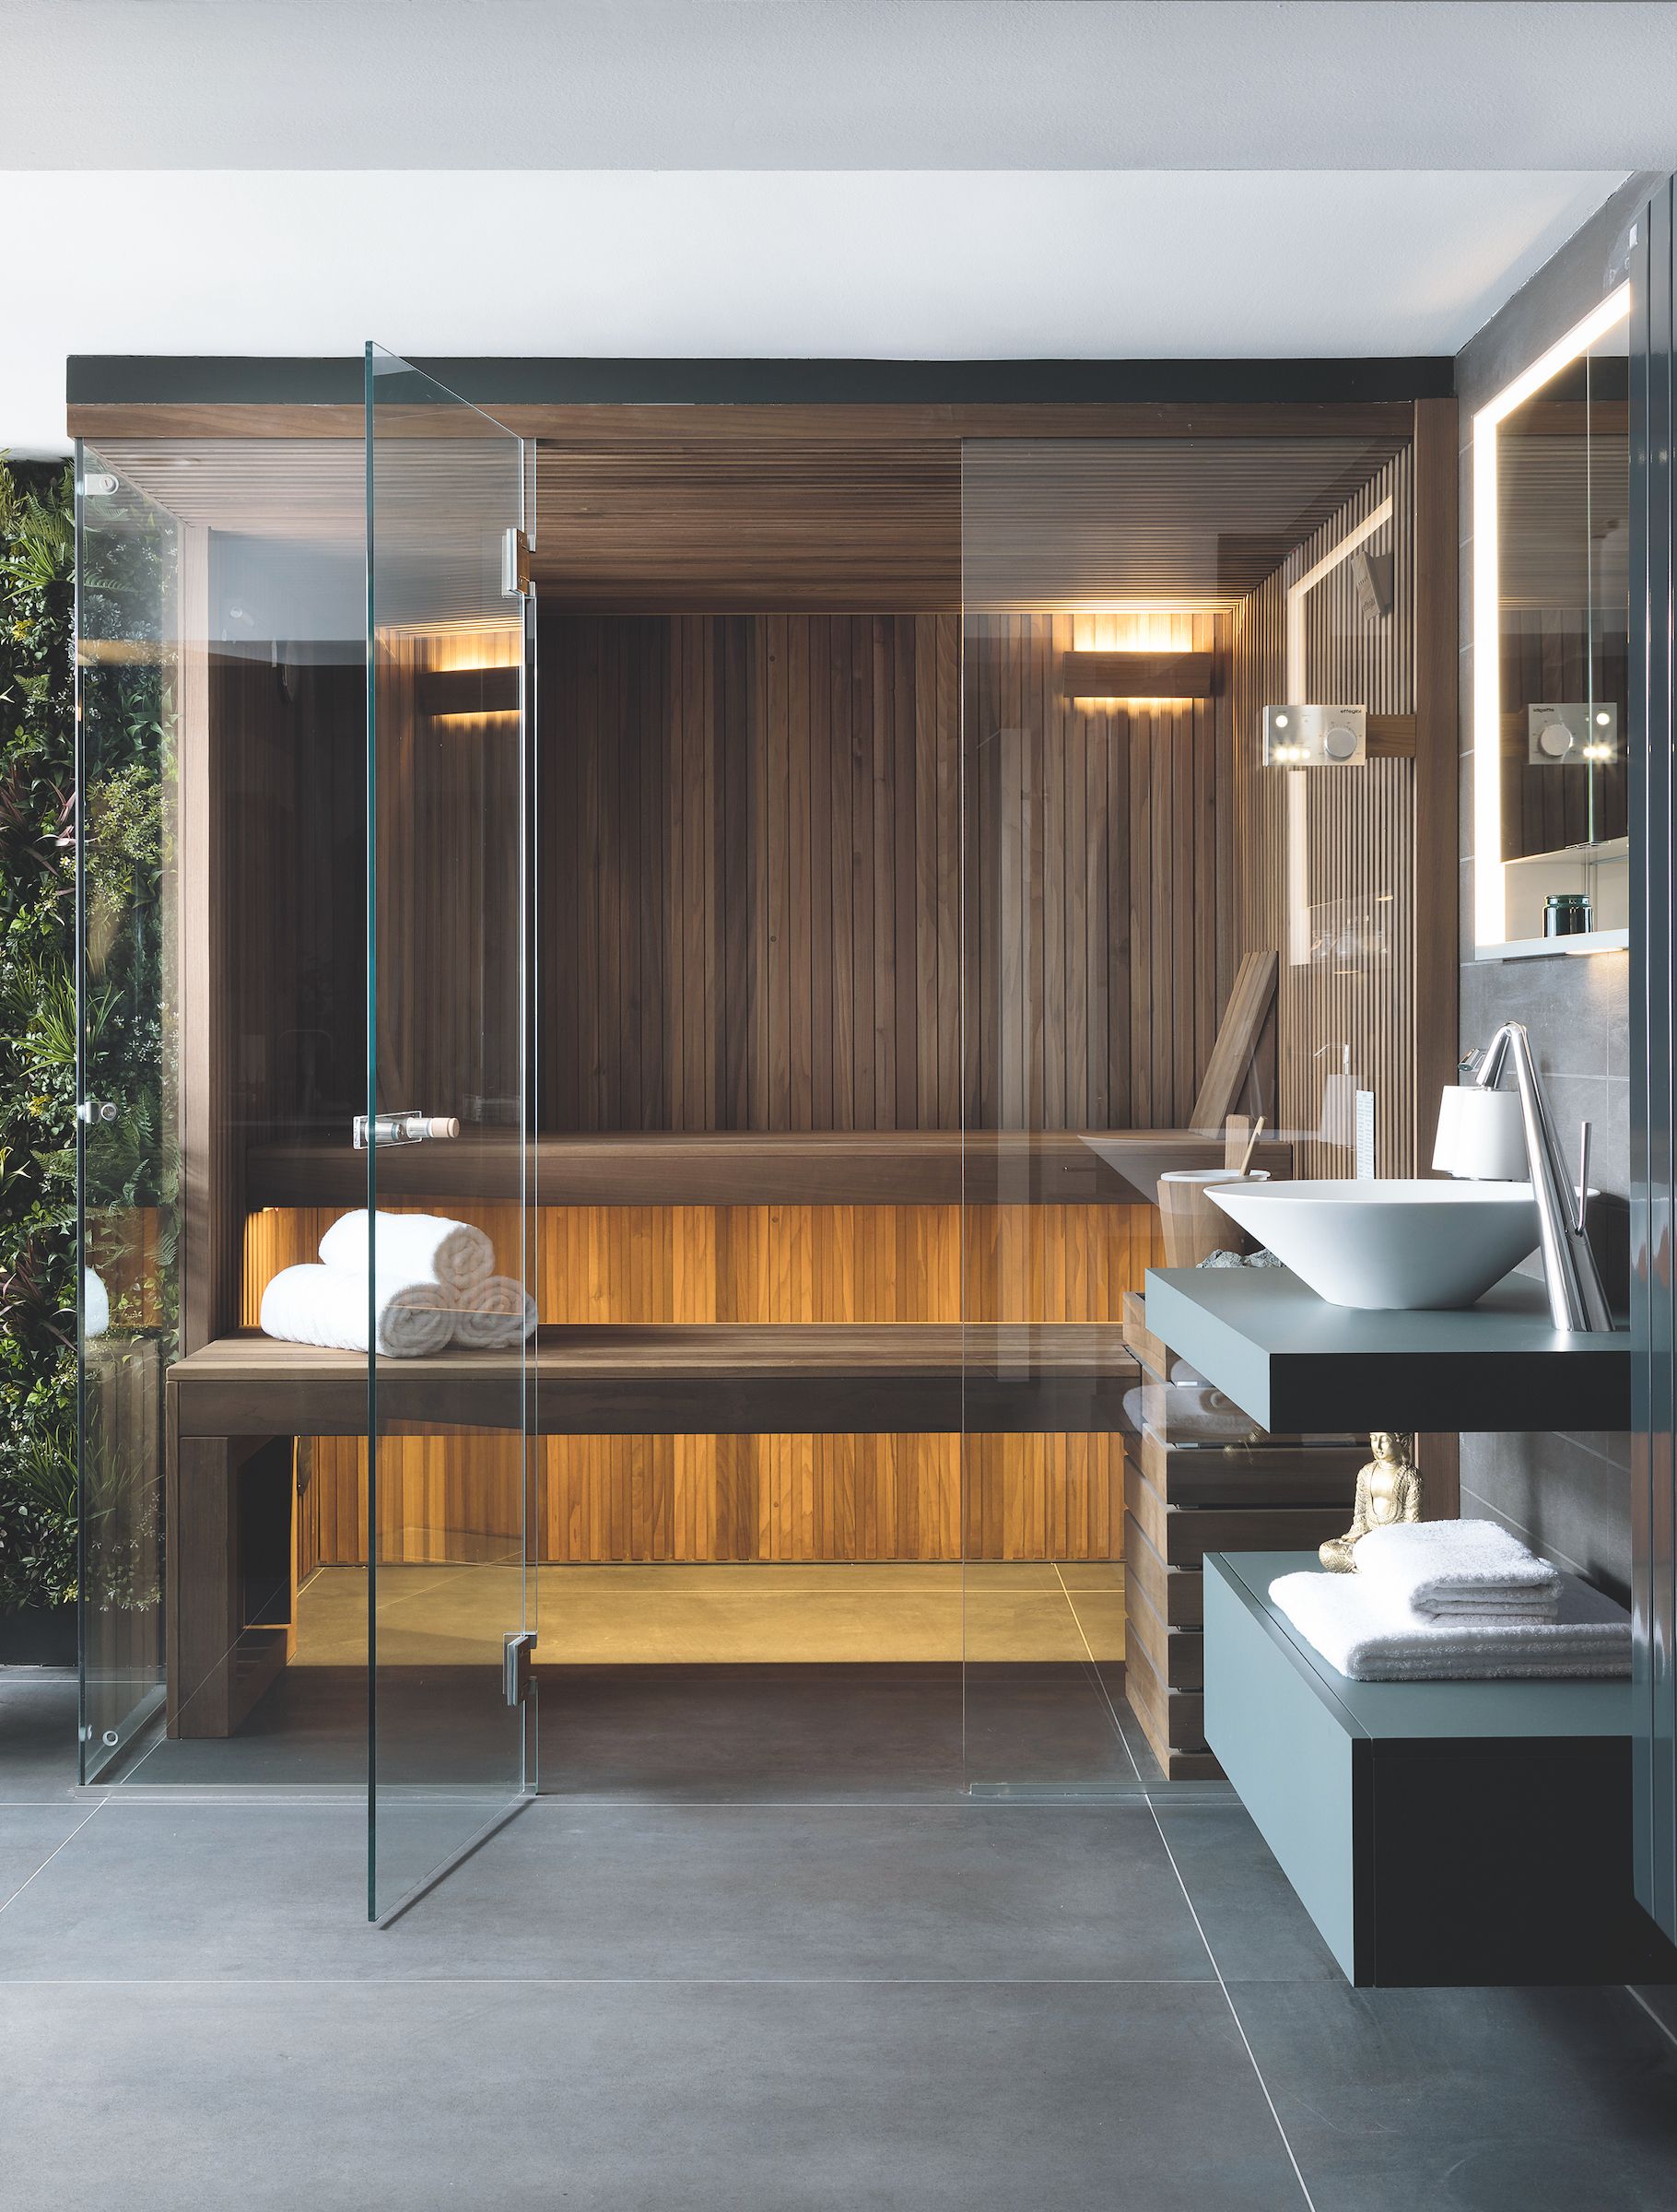 <p>                     A sauna is the ultimate wellbeing treat, with dry heat to soothe muscles and de-stress the spirit. While the typical wood box is fine in a home gym, it can overpower a bathroom at home, so look for a design with stylish paneling or even glass walls for your personal spa space.                   </p>                                      <p>                     ‘With a larger variety of wooden finishes than ever before, a sauna can now fit into your desired scheme, rather than dictate it,’ agrees Yousef Mansuri, director of design at CP Hart. ‘Effegibi’s Sky Sauna is a versatile design, ideal for made-to-measure solutions, with wide floor-to-ceiling glass panels and a glazed roof that create a beautifully light and airy feel.’                   </p>                                      <p>                     Saunas like this can also be customized with different woods, colored LED lighting and audio speakers.                   </p>